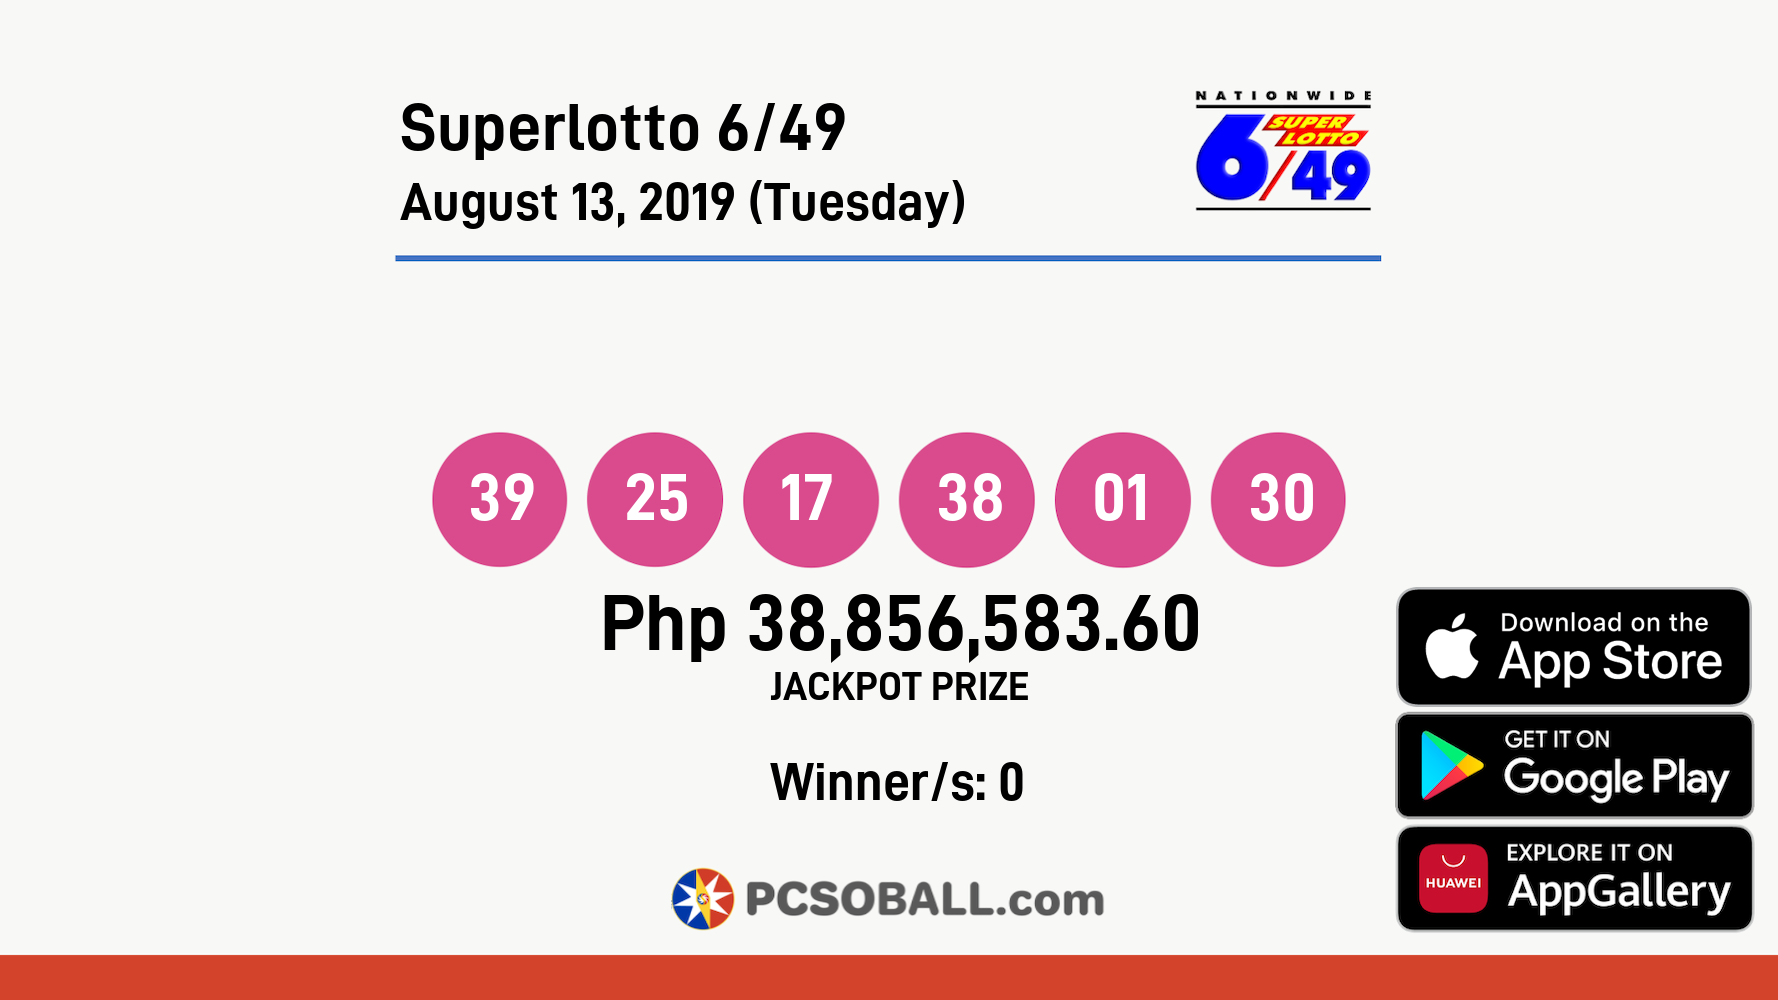 Superlotto 6/49 August 13, 2019 (Tuesday) Result